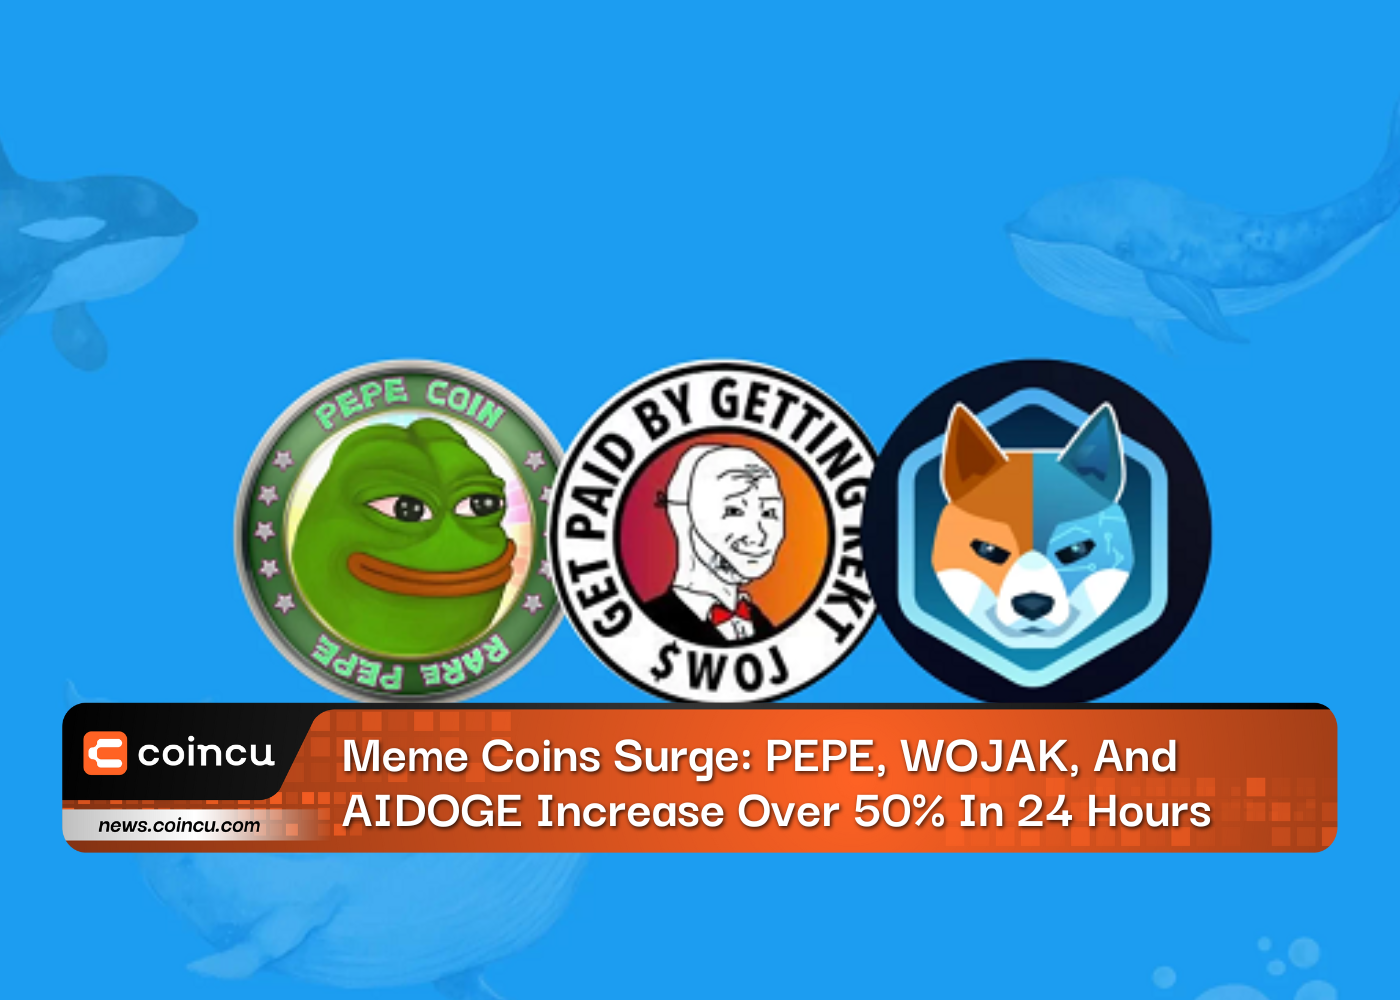 Meme Coins Surge: PEPE, WOJAK, And AIDOGE Increase Over 50% In 24 Hours